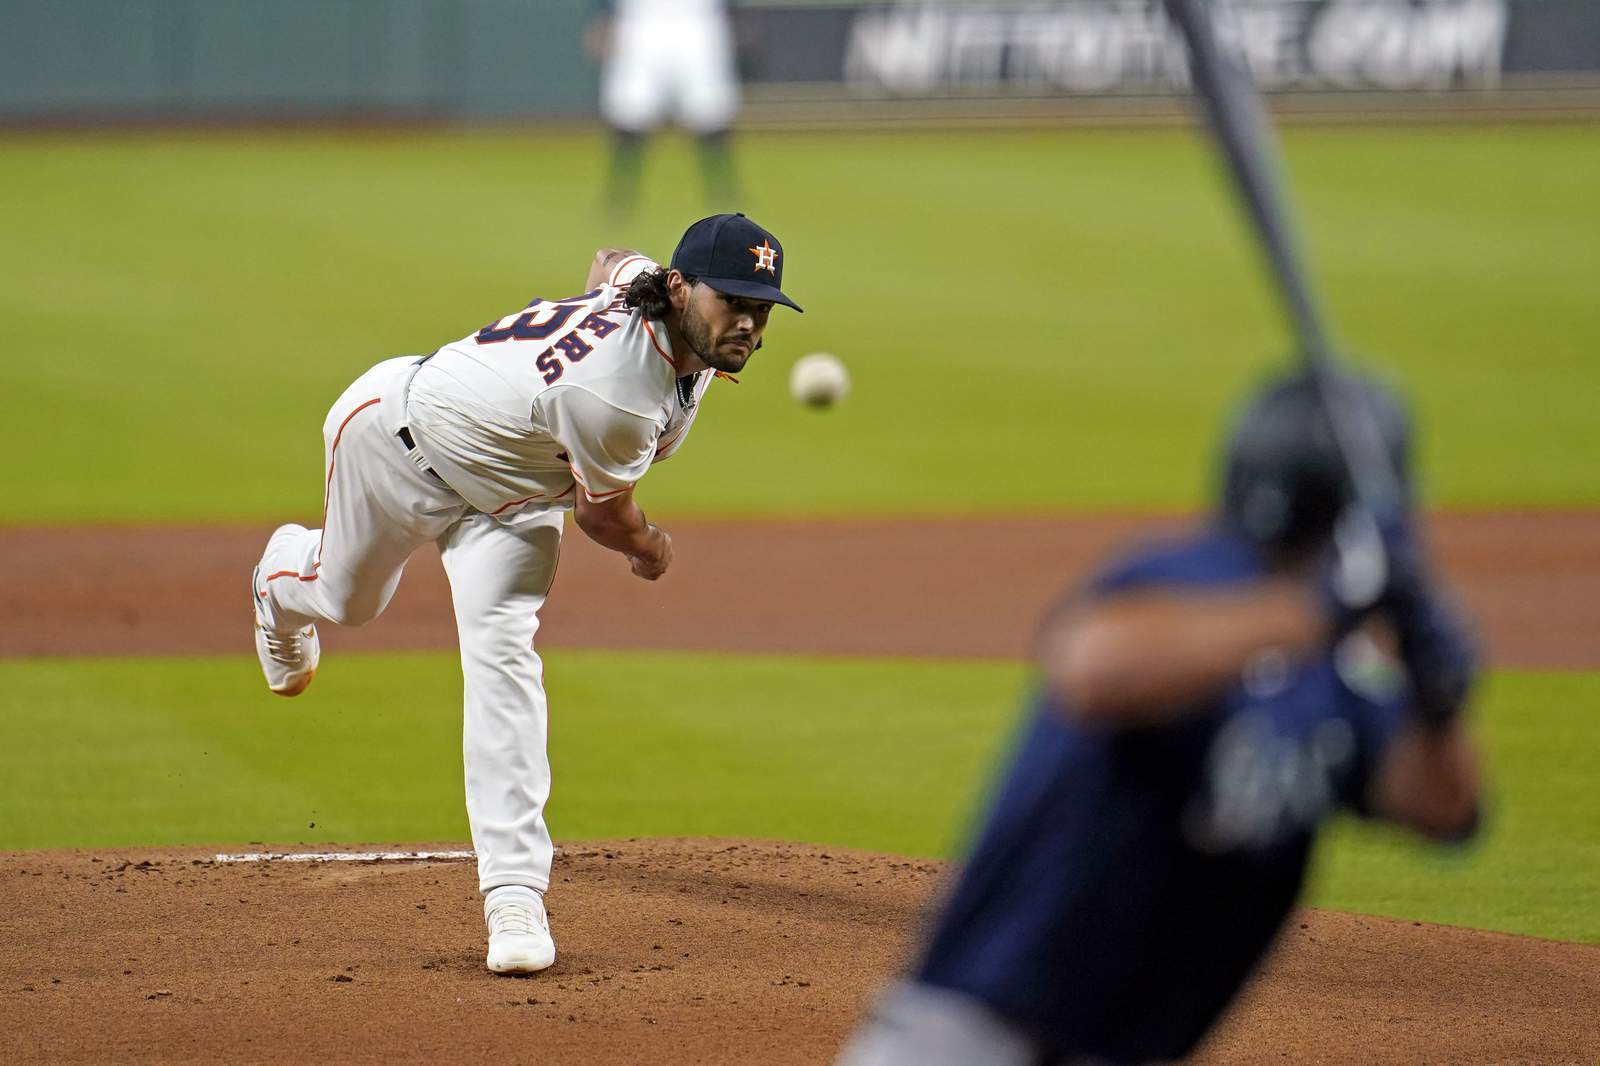 Astros drop first game of season against Mariners, 7-6